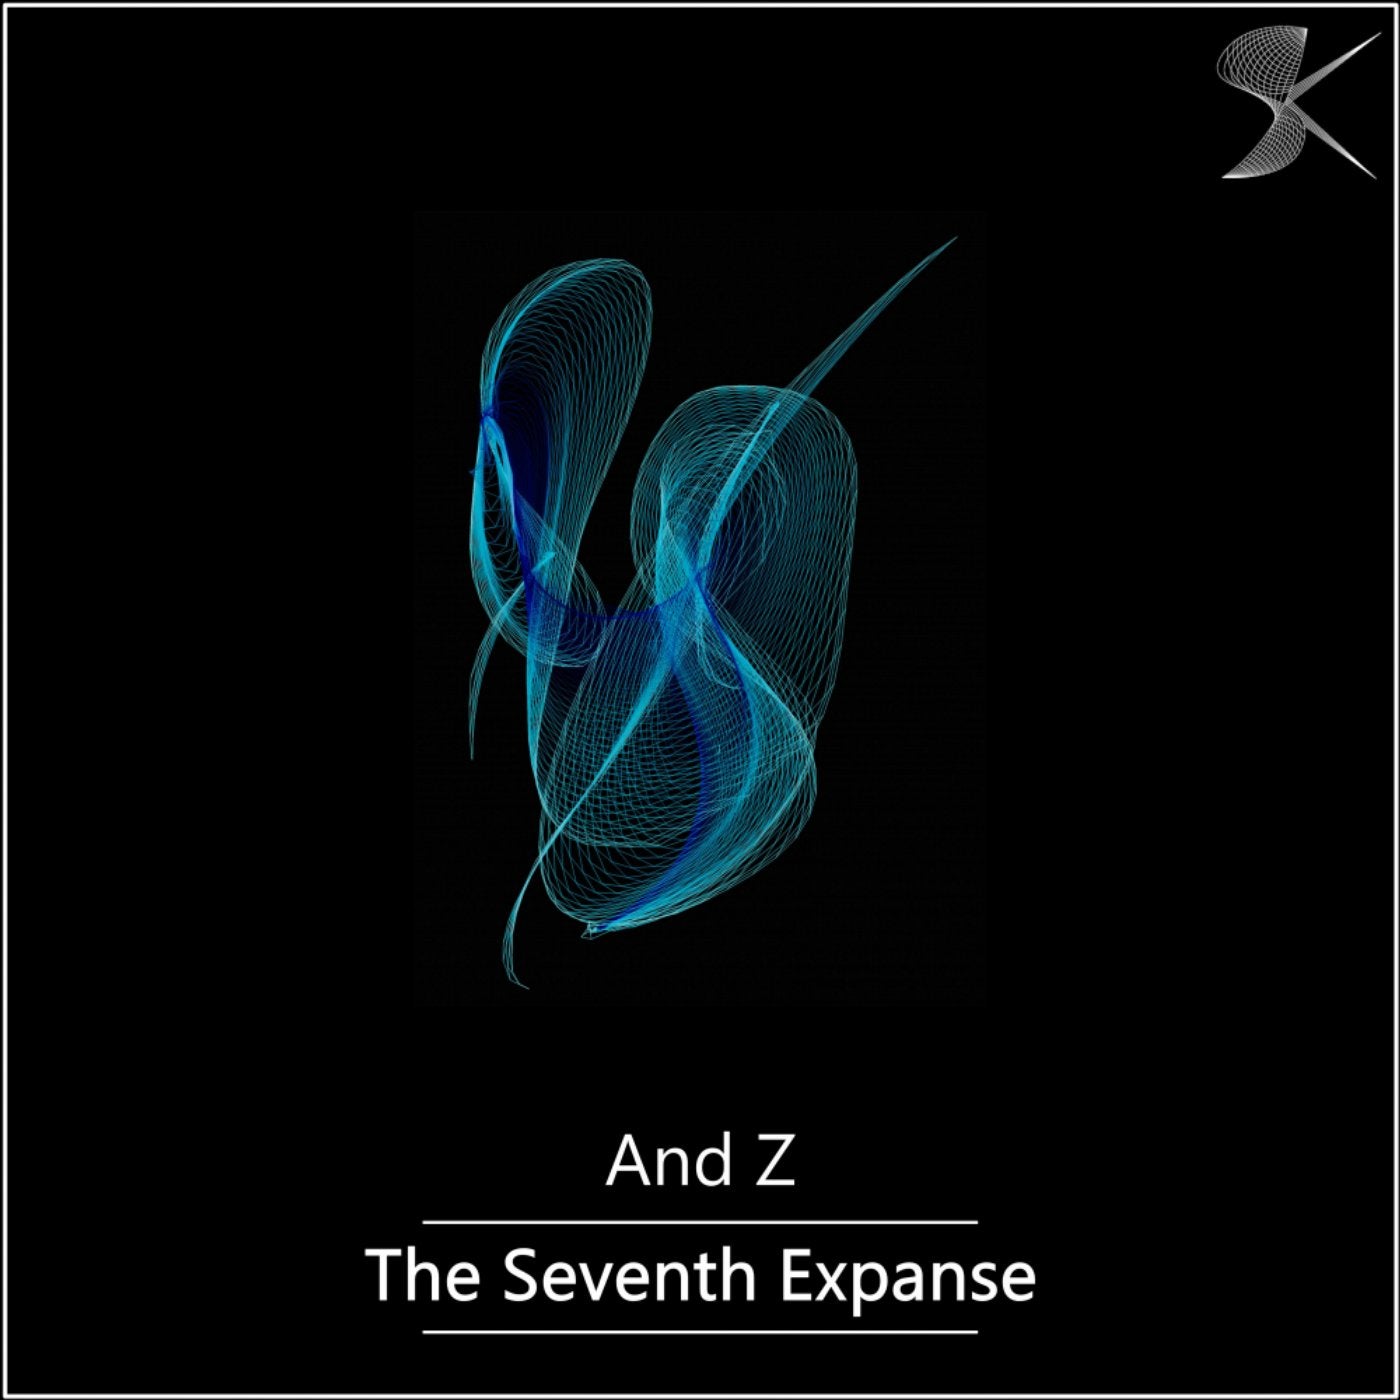 The Seventh Expanse